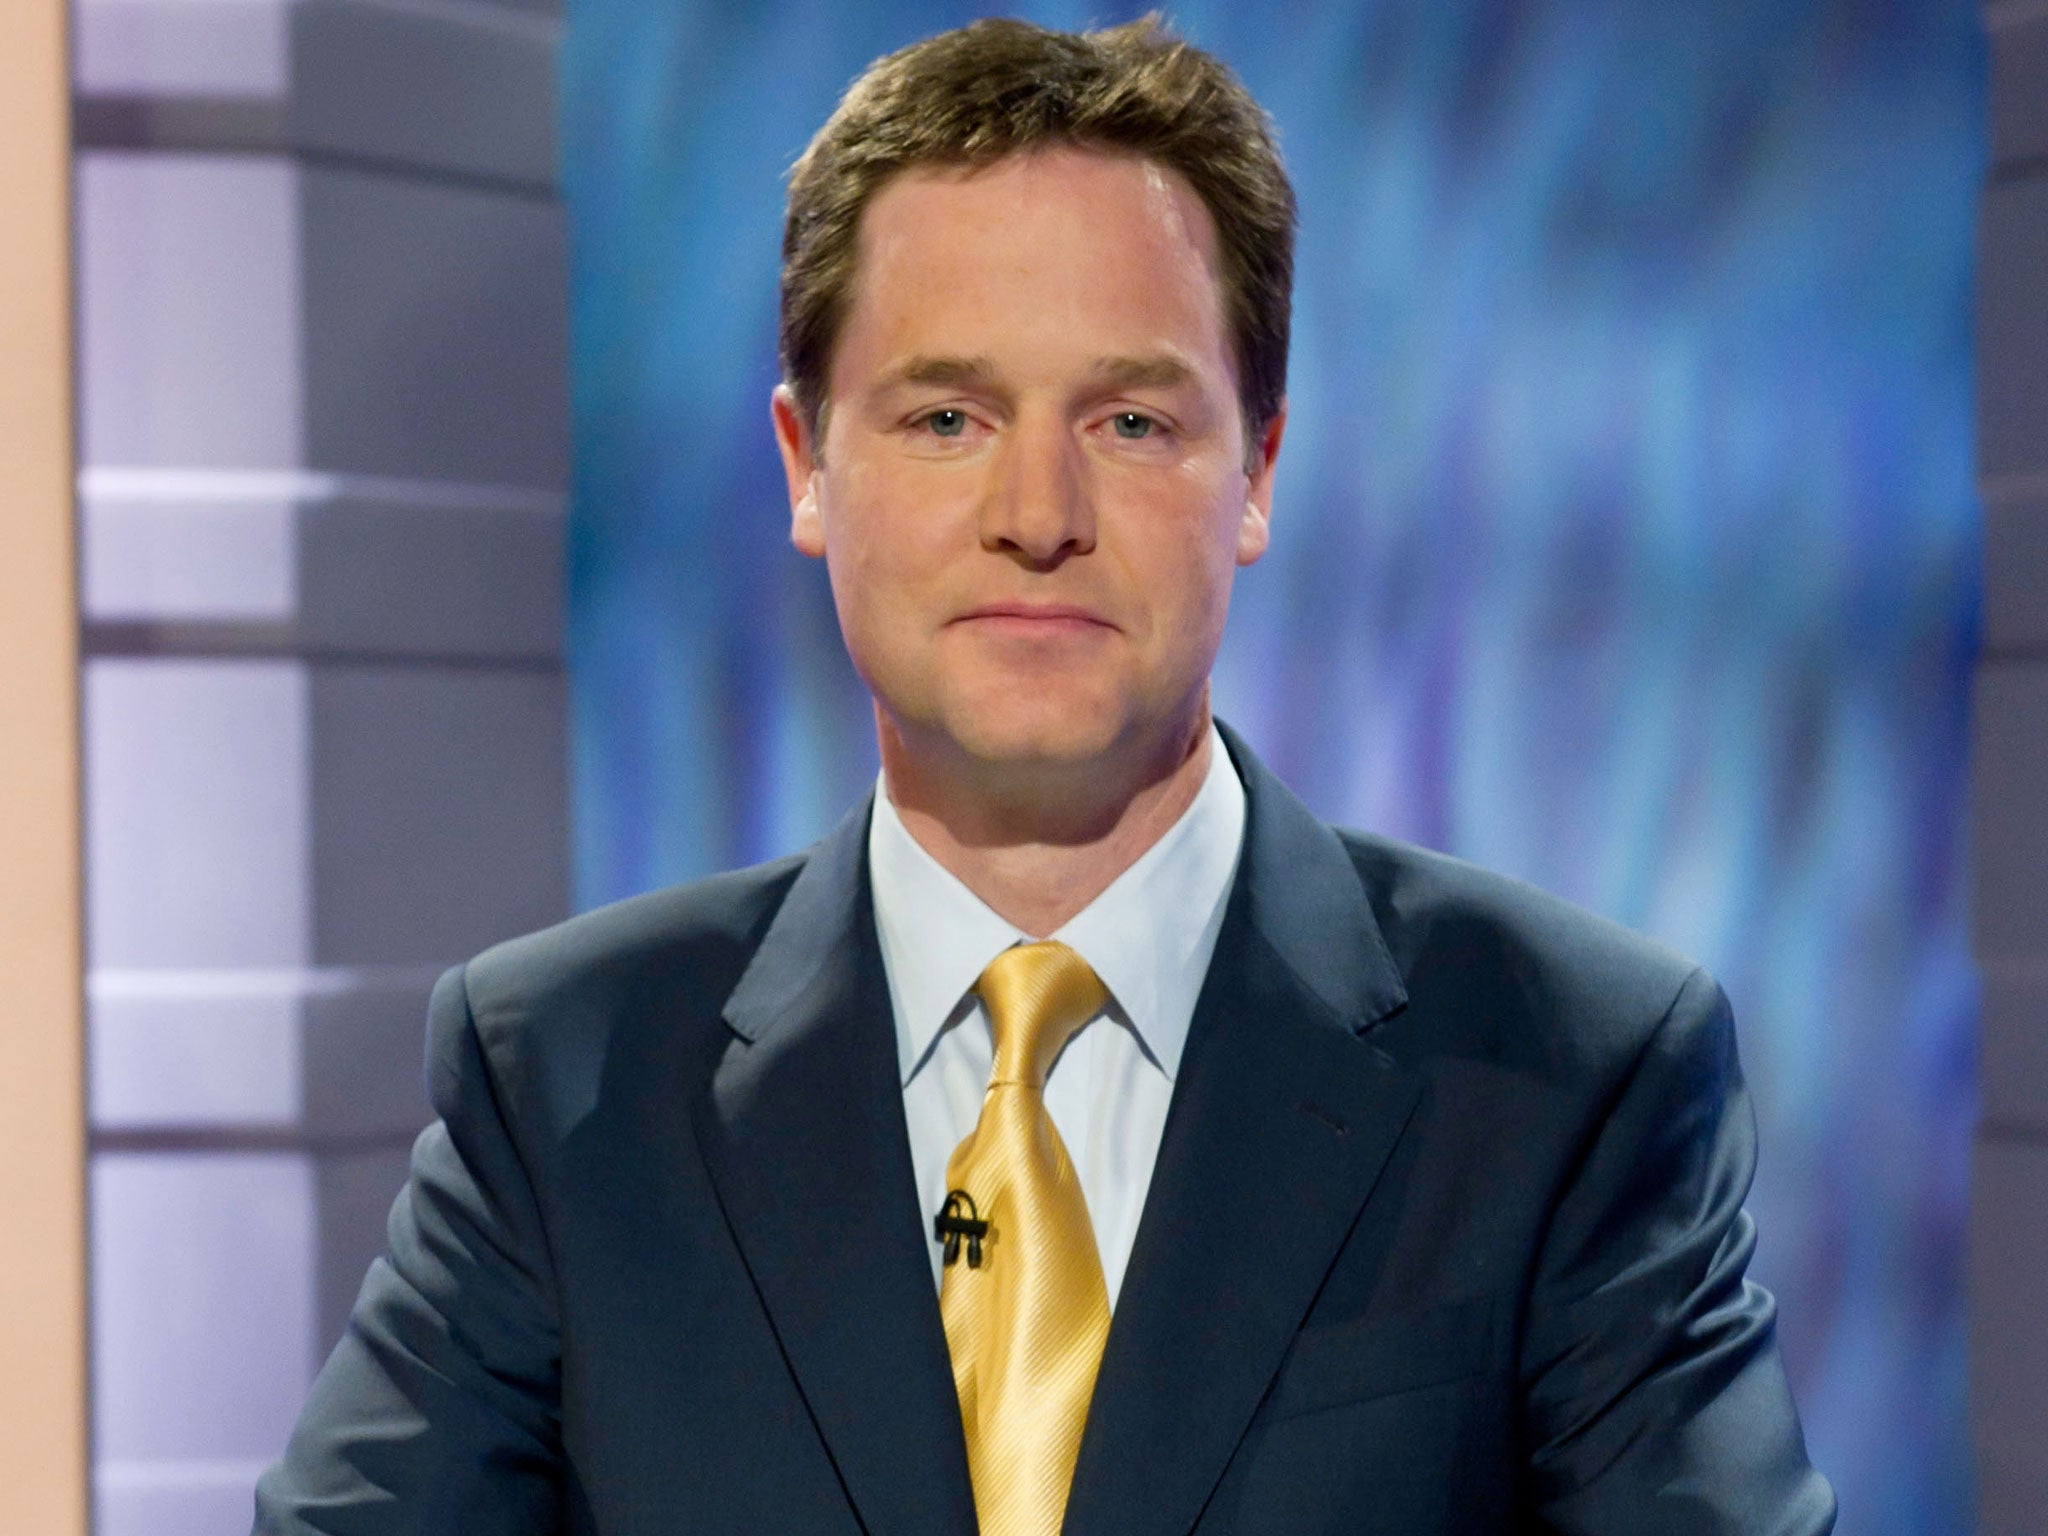 Deputy PM Nick Clegg, pictured here in the run-up to the 2010 Election, when he promised to phase out tuition fees in his party's manifesto (Getty)